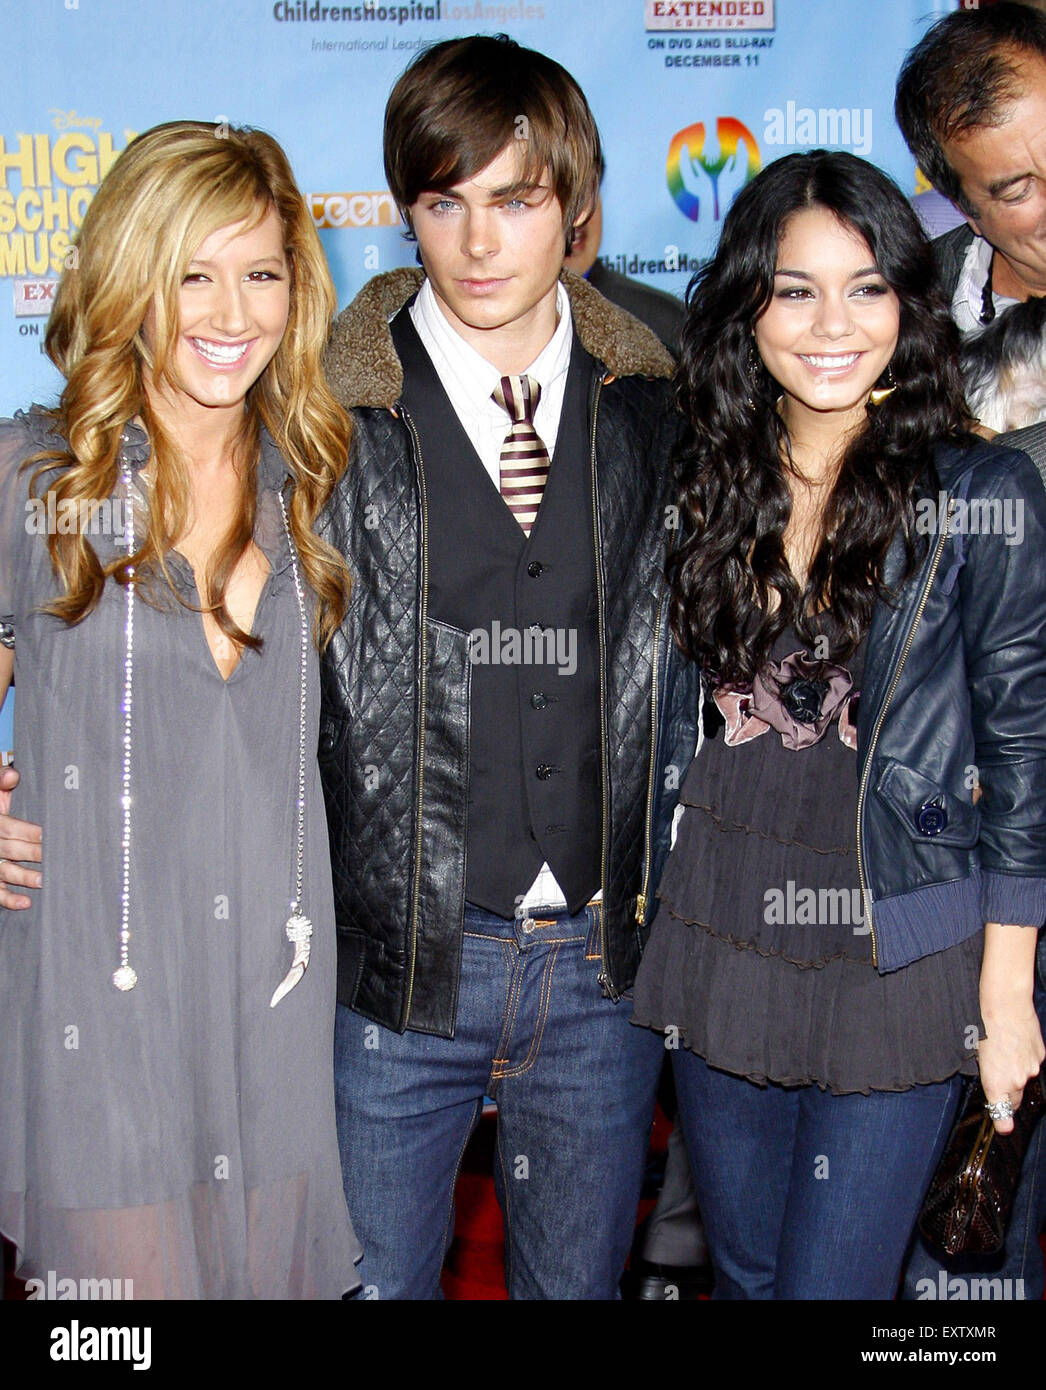 Ashley Tisdale, Zac Efron and Vanessa Anne Hudgens attend the DVD Release Premiere of 'High School Musical 2: Extended Edition' held at the El Capitan Theater in Hollywood, California, United States on November 19, 2007. Stock Photo